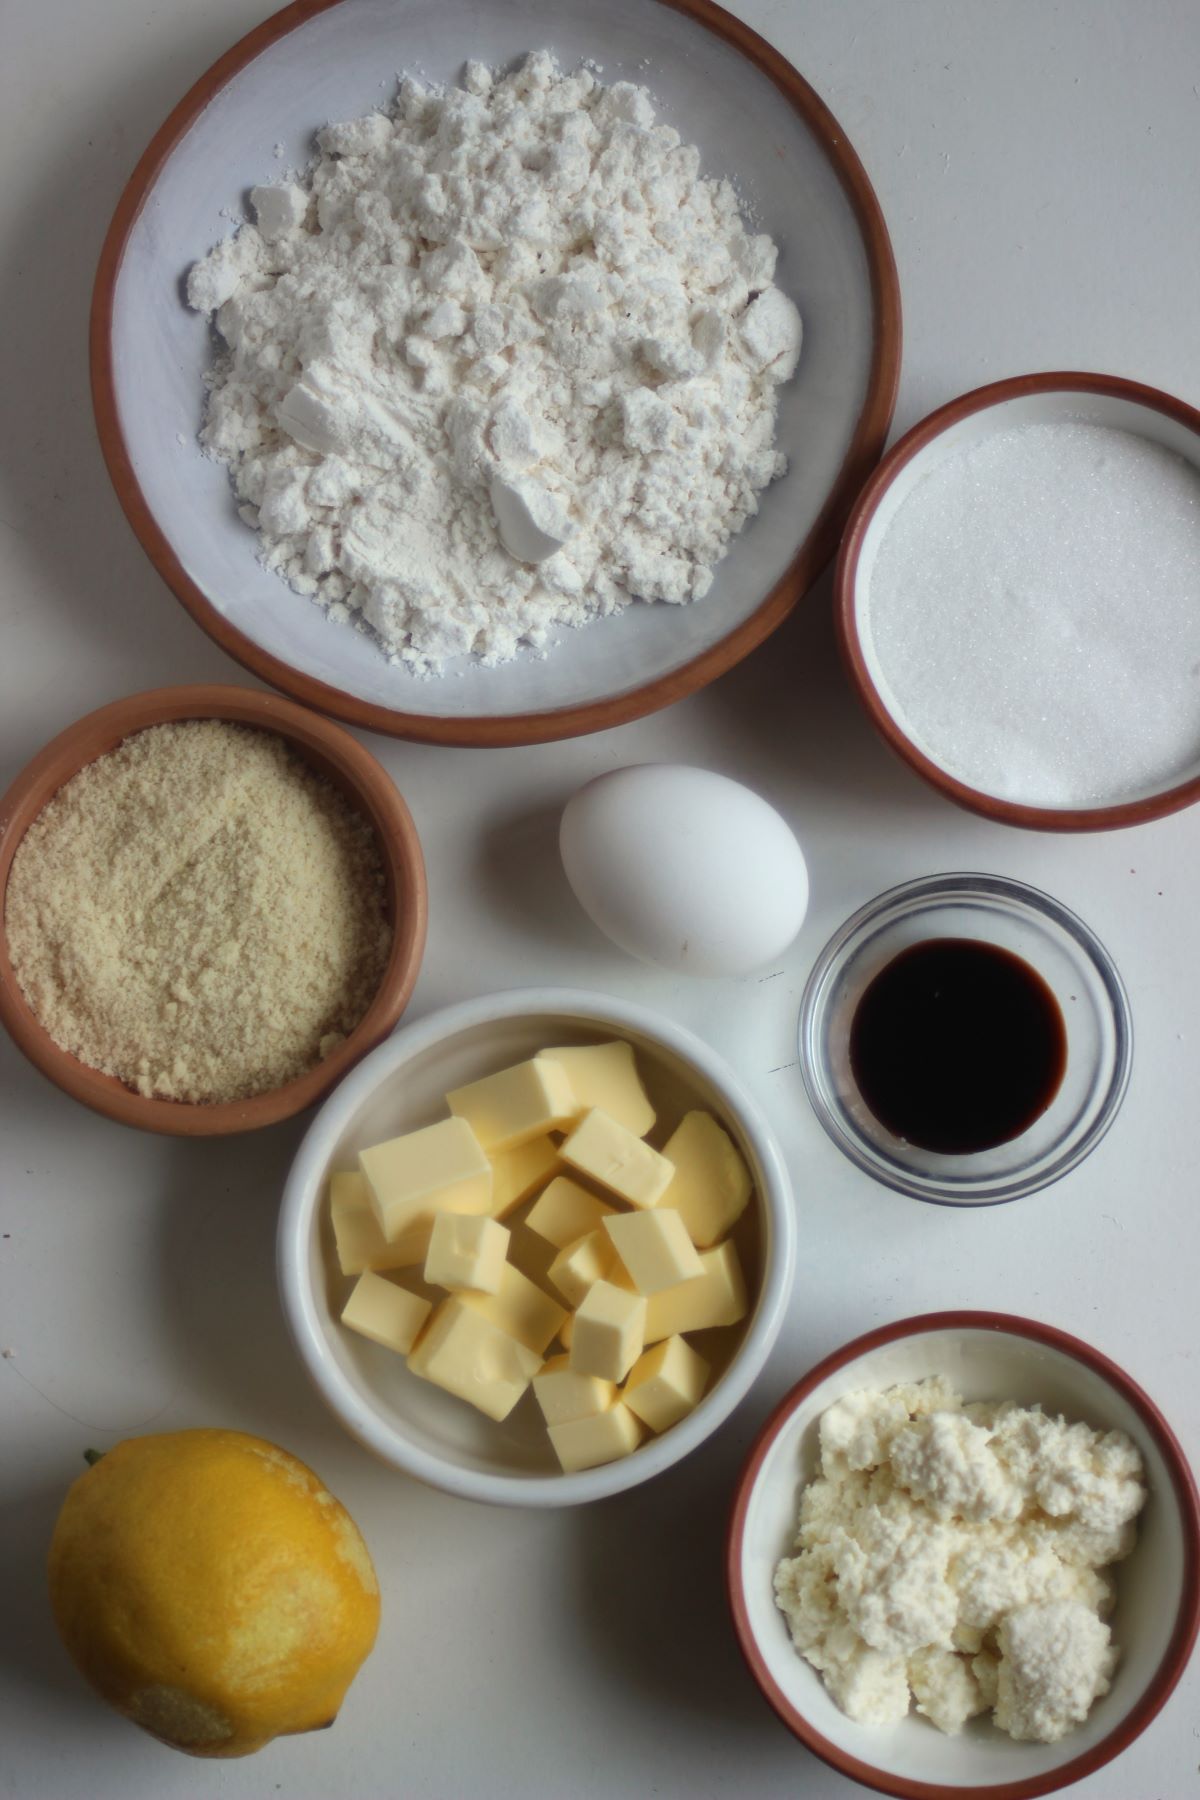 Lemon Ricotta Cookies ingredients in different plates seen from above.